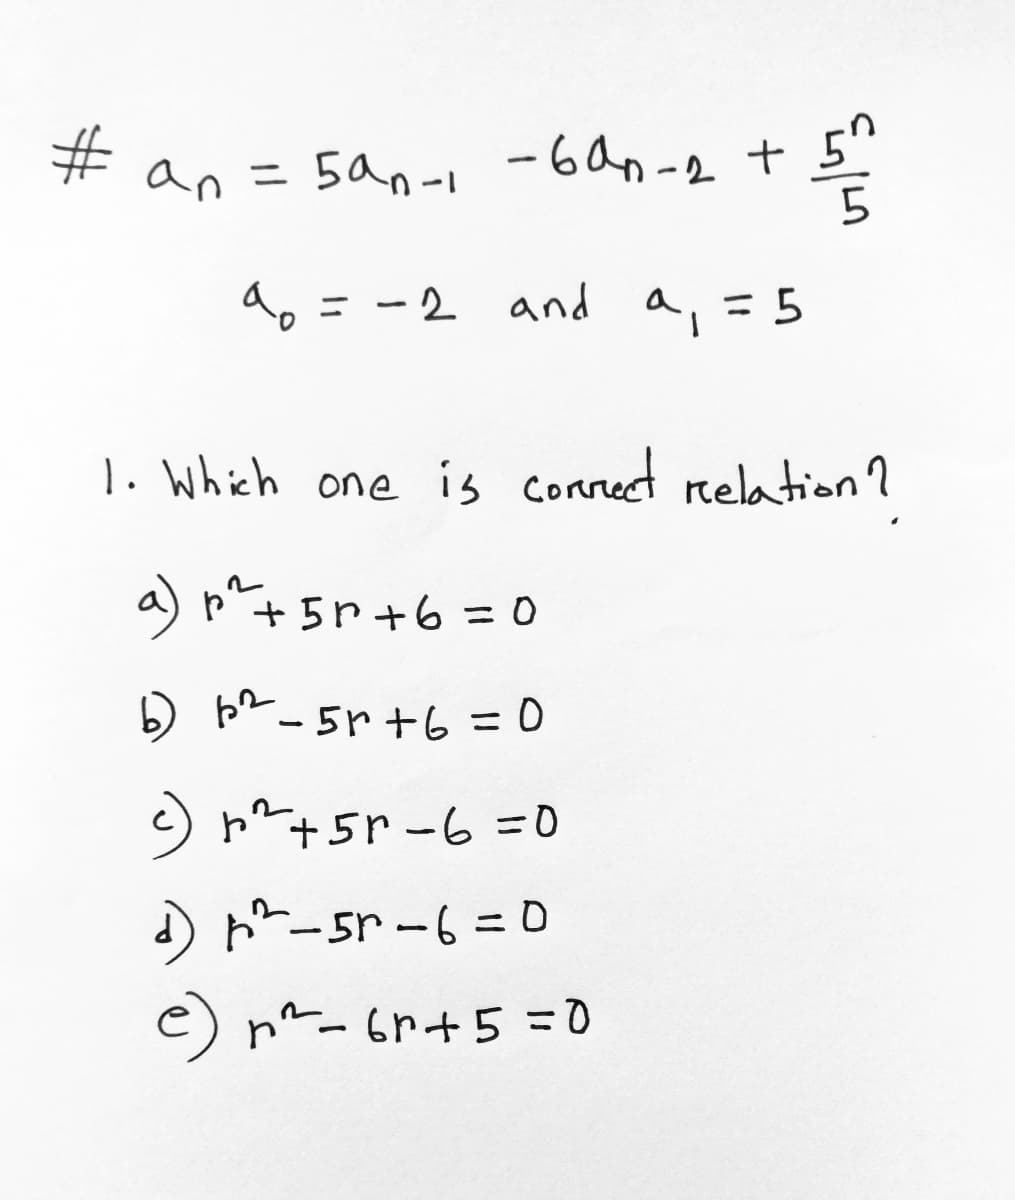 an = 5an-1 -6an-2 +
# an
5"
do = -2 and a, = 5
1. Which one is connect relation ?
a) p + 5r+6=D0
) br -5r +6 = 0
) n^+5r-6 =0
)ド-5r-6 =D
e) n-6r+5 =0
